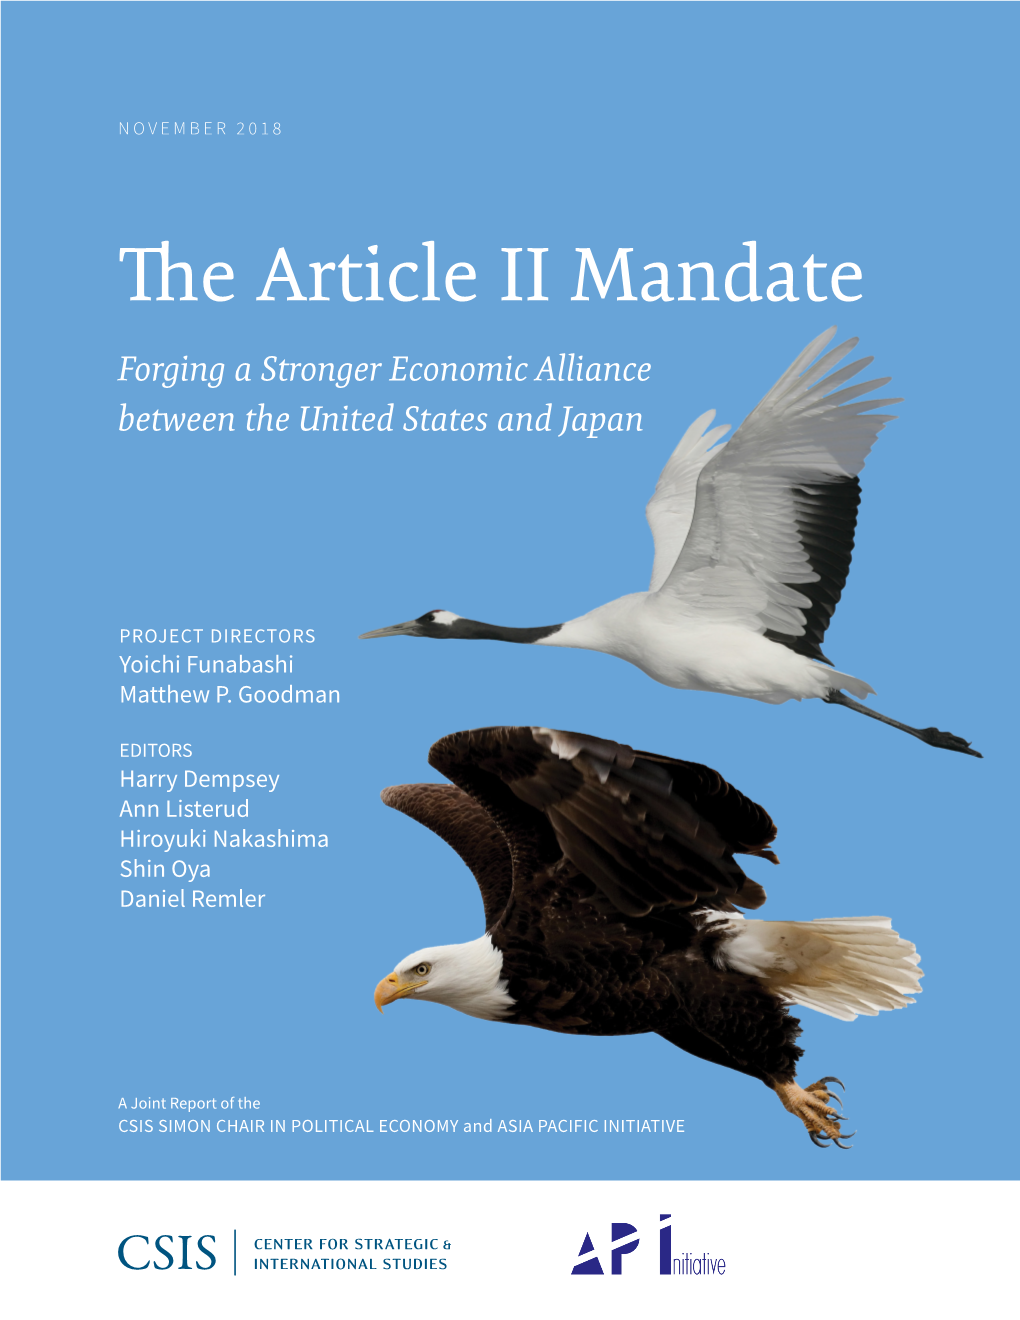 The Article II Mandate Forging a Stronger Economic Alliance Between the United States and Japan